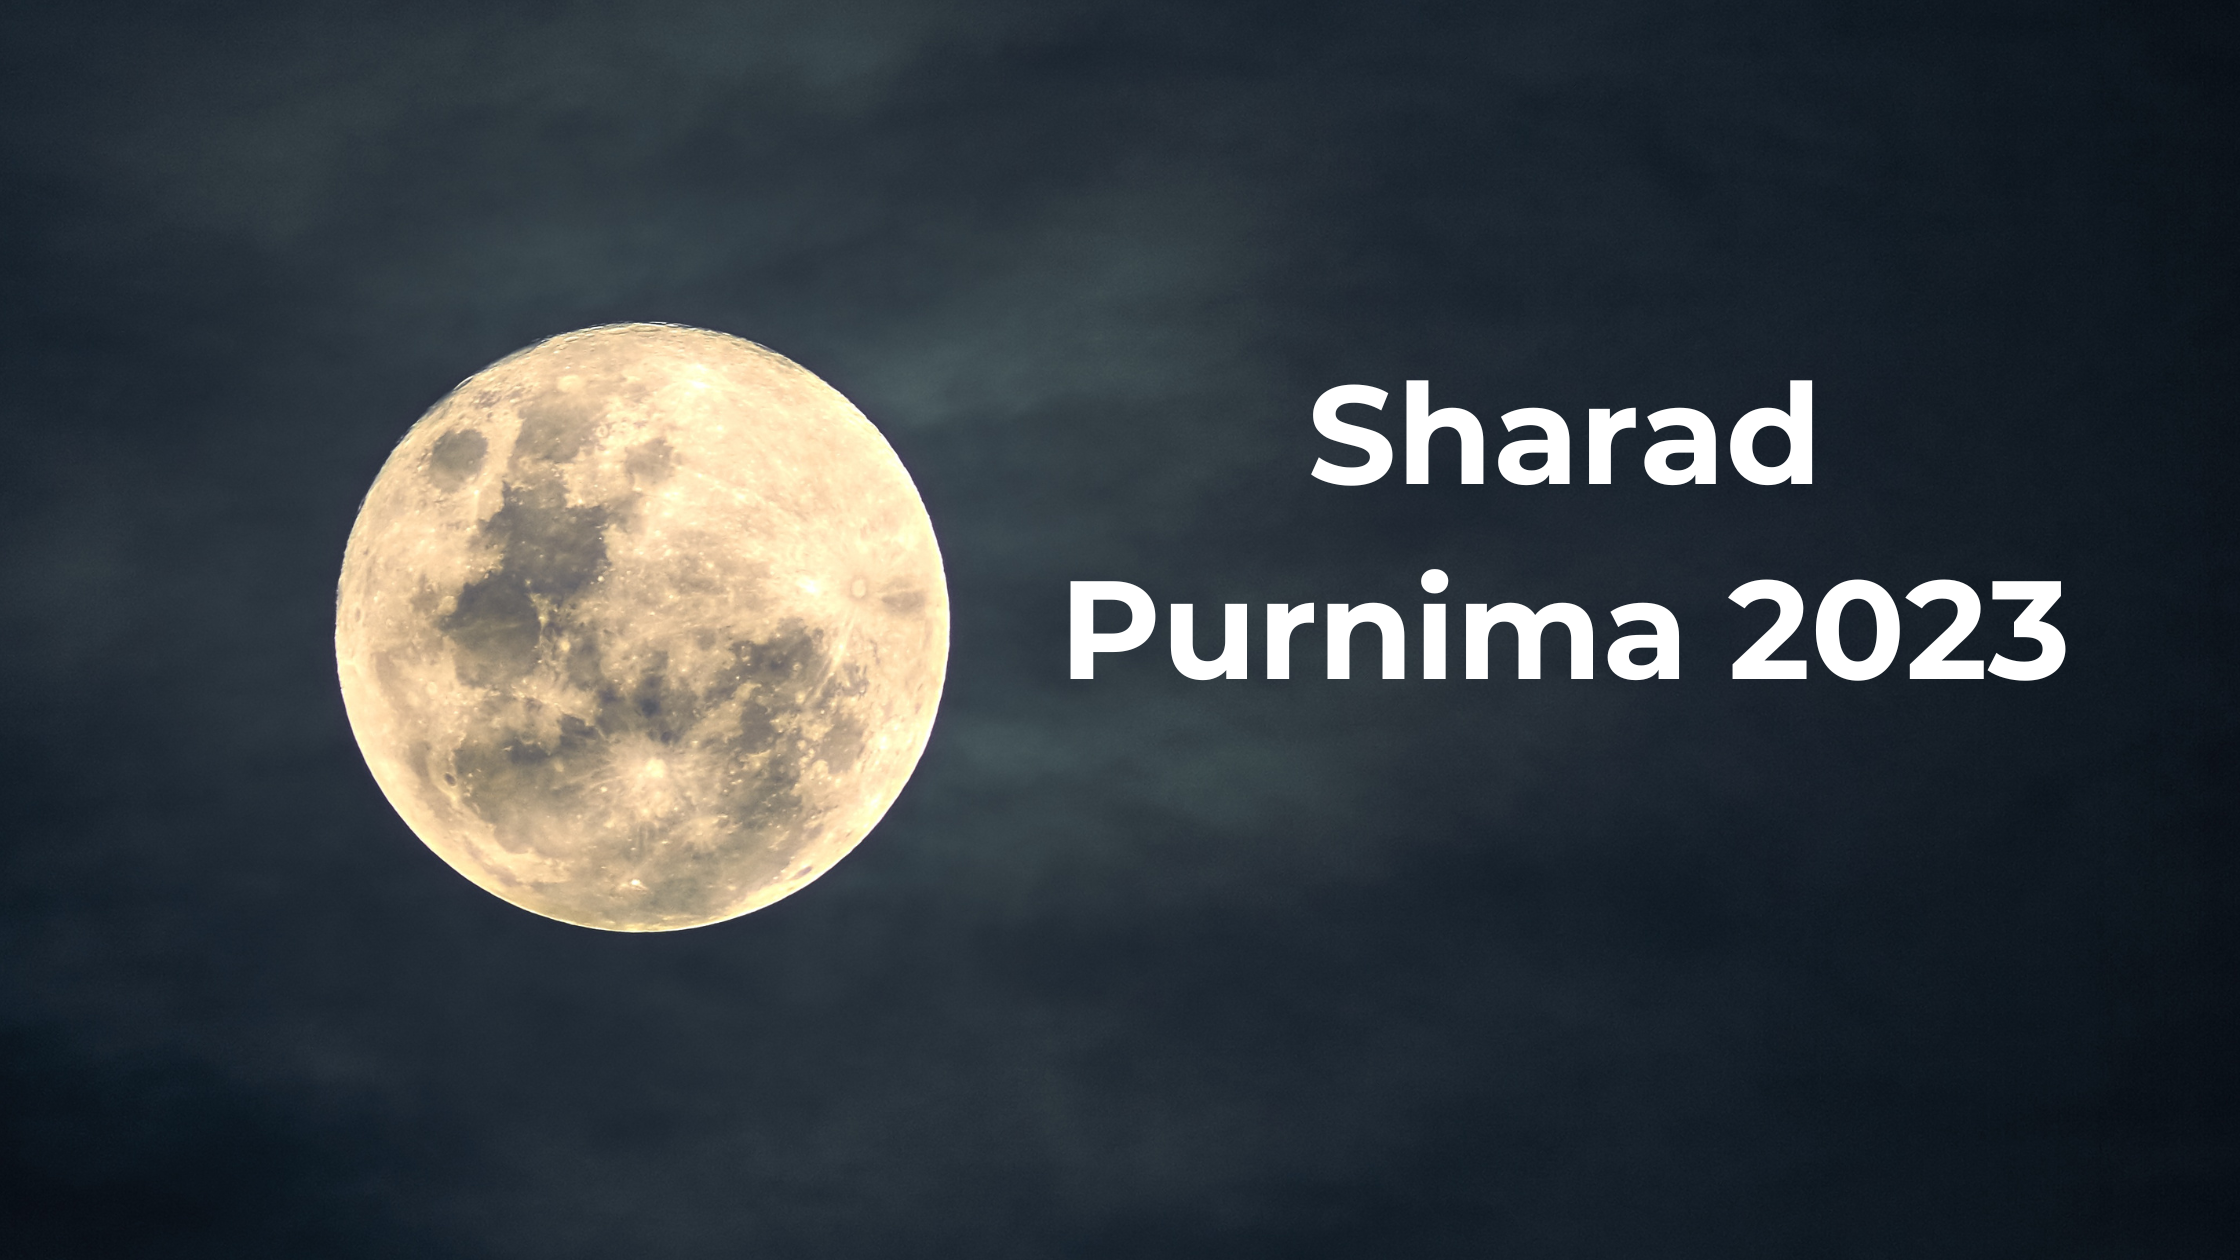 Learn about Sharad Purnima 2023, including its date, history, significance, and how it is celebrated.